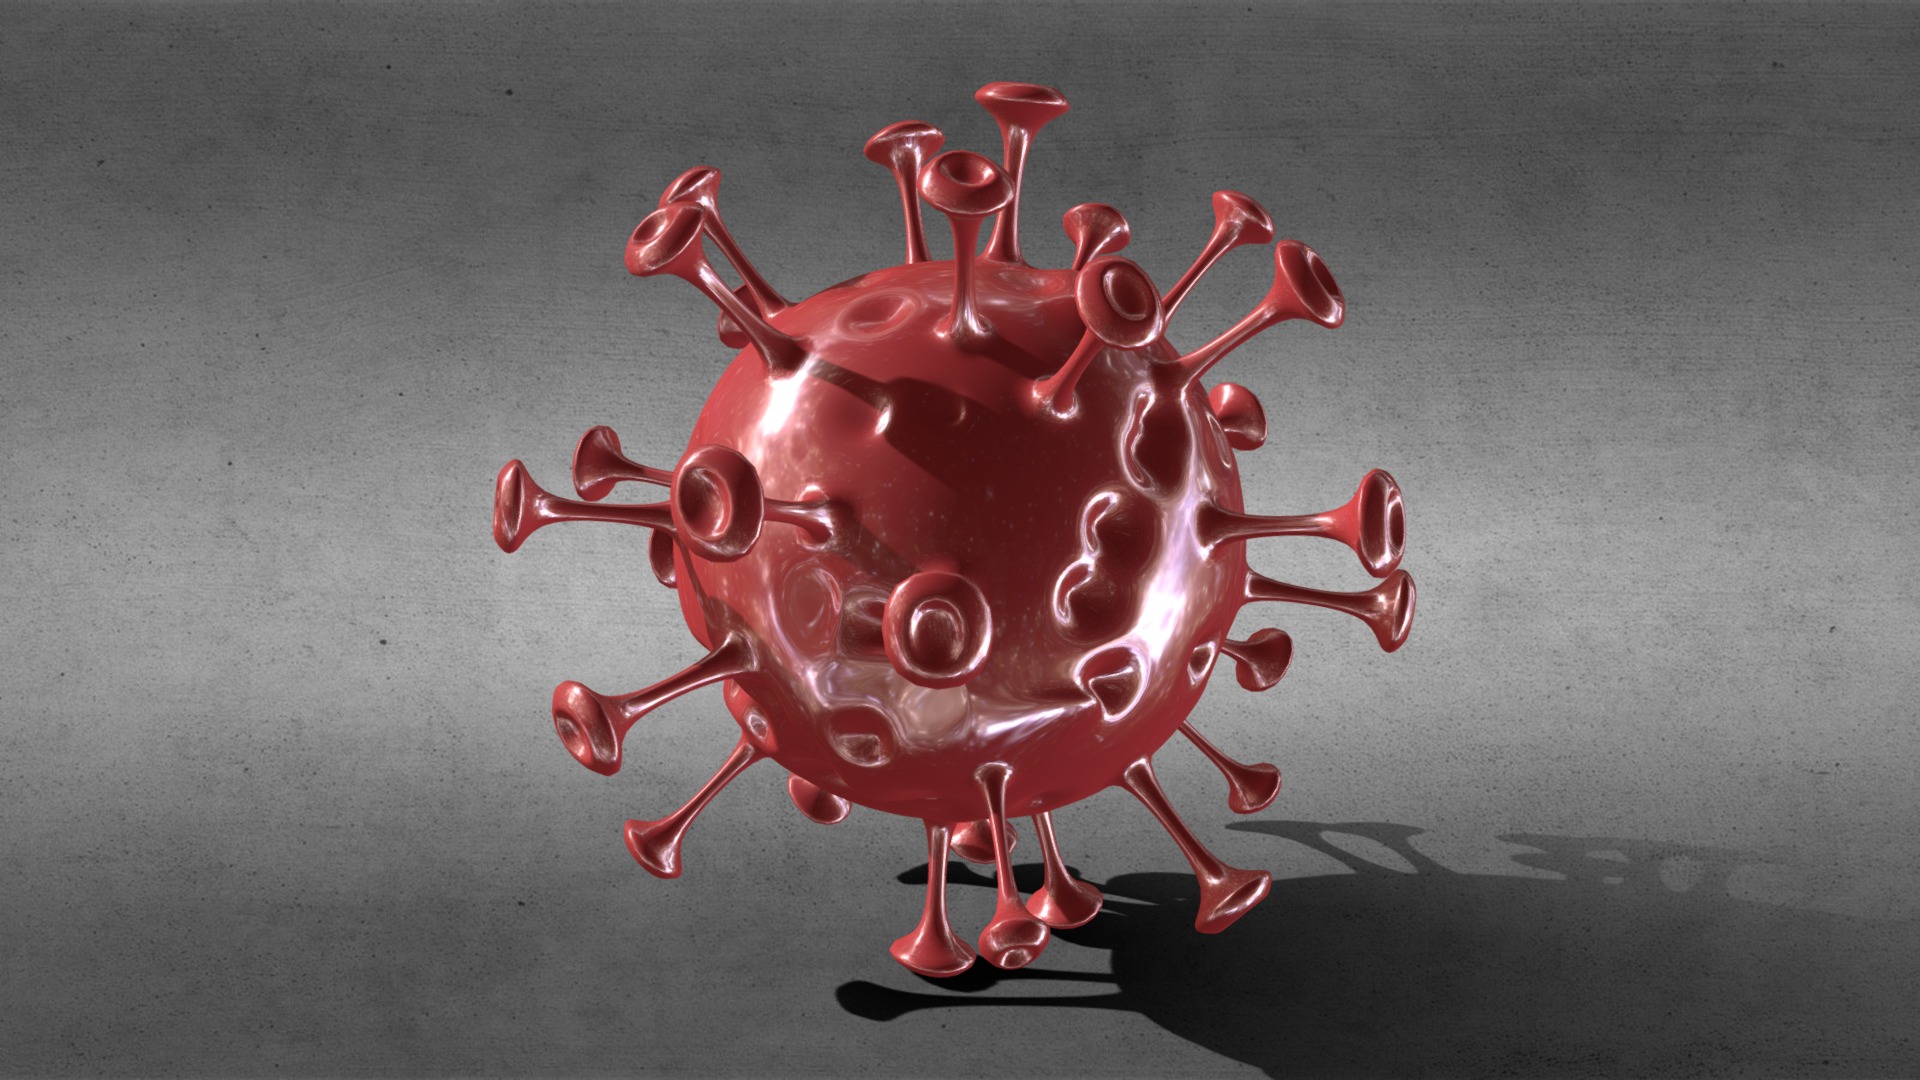 3D model Coronavirus N Co V Novel-1 - This is a 3D model of the Coronavirus N Co V Novel-1. The 3D model is about a red sculpture of a dragon.